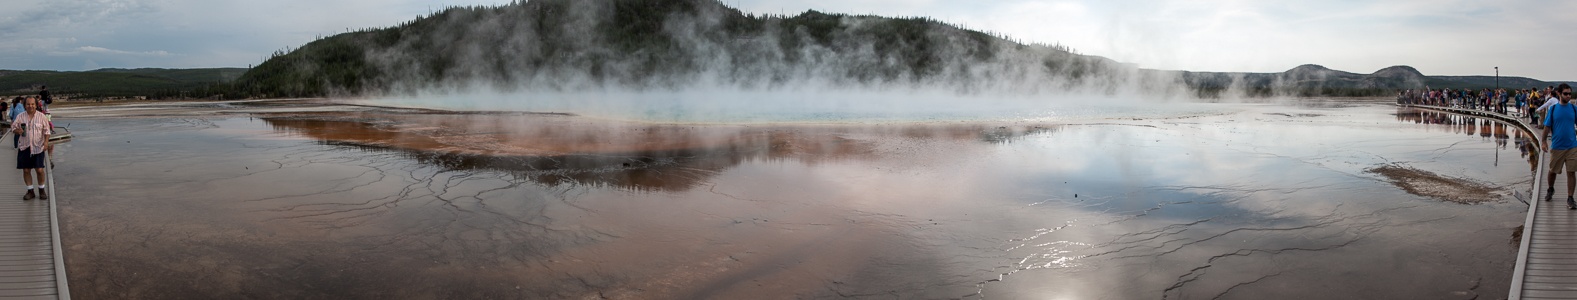 Midway Geyser Basin: Grand Prismatic Spring Yellowstone National Park